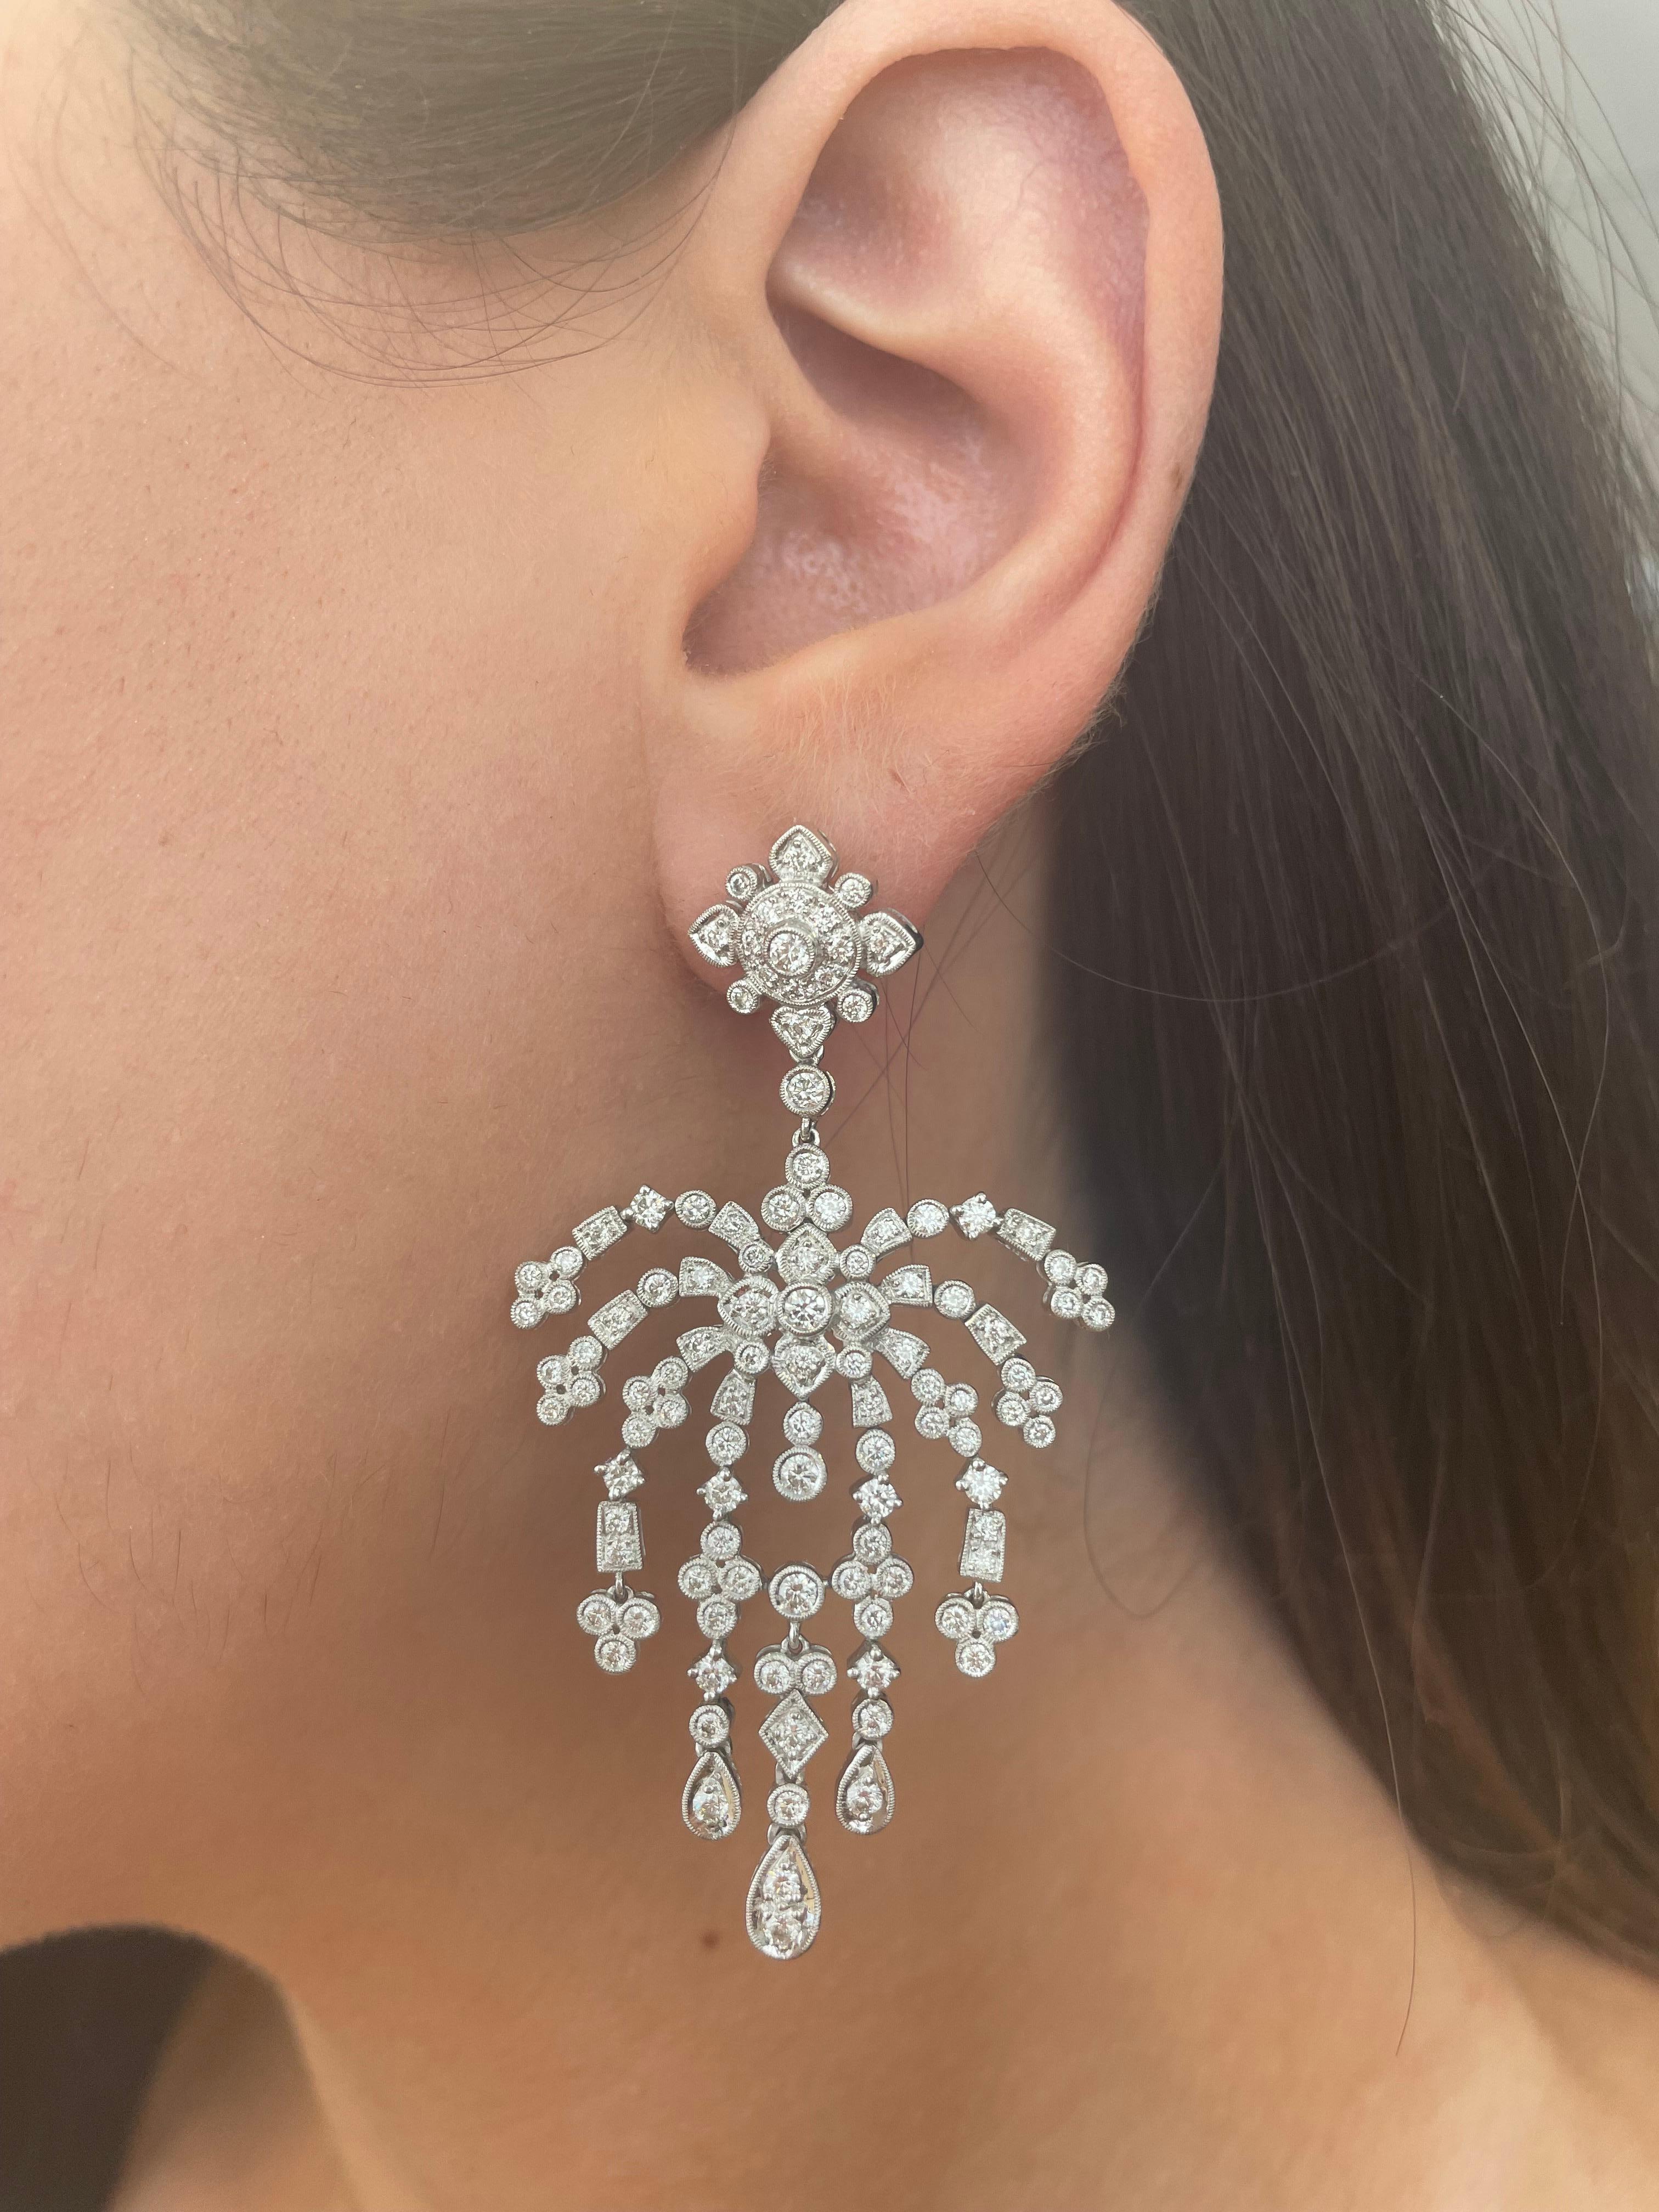 Stunning Edwardian inspired bezel set chandelier earrings.
222 round brilliant diamonds, 3.66 carats total. Approximately G/H color grade and SI clarity grade. Bezel set with milgrain work, 18k white gold.
Accommodated with an up to date appraisal